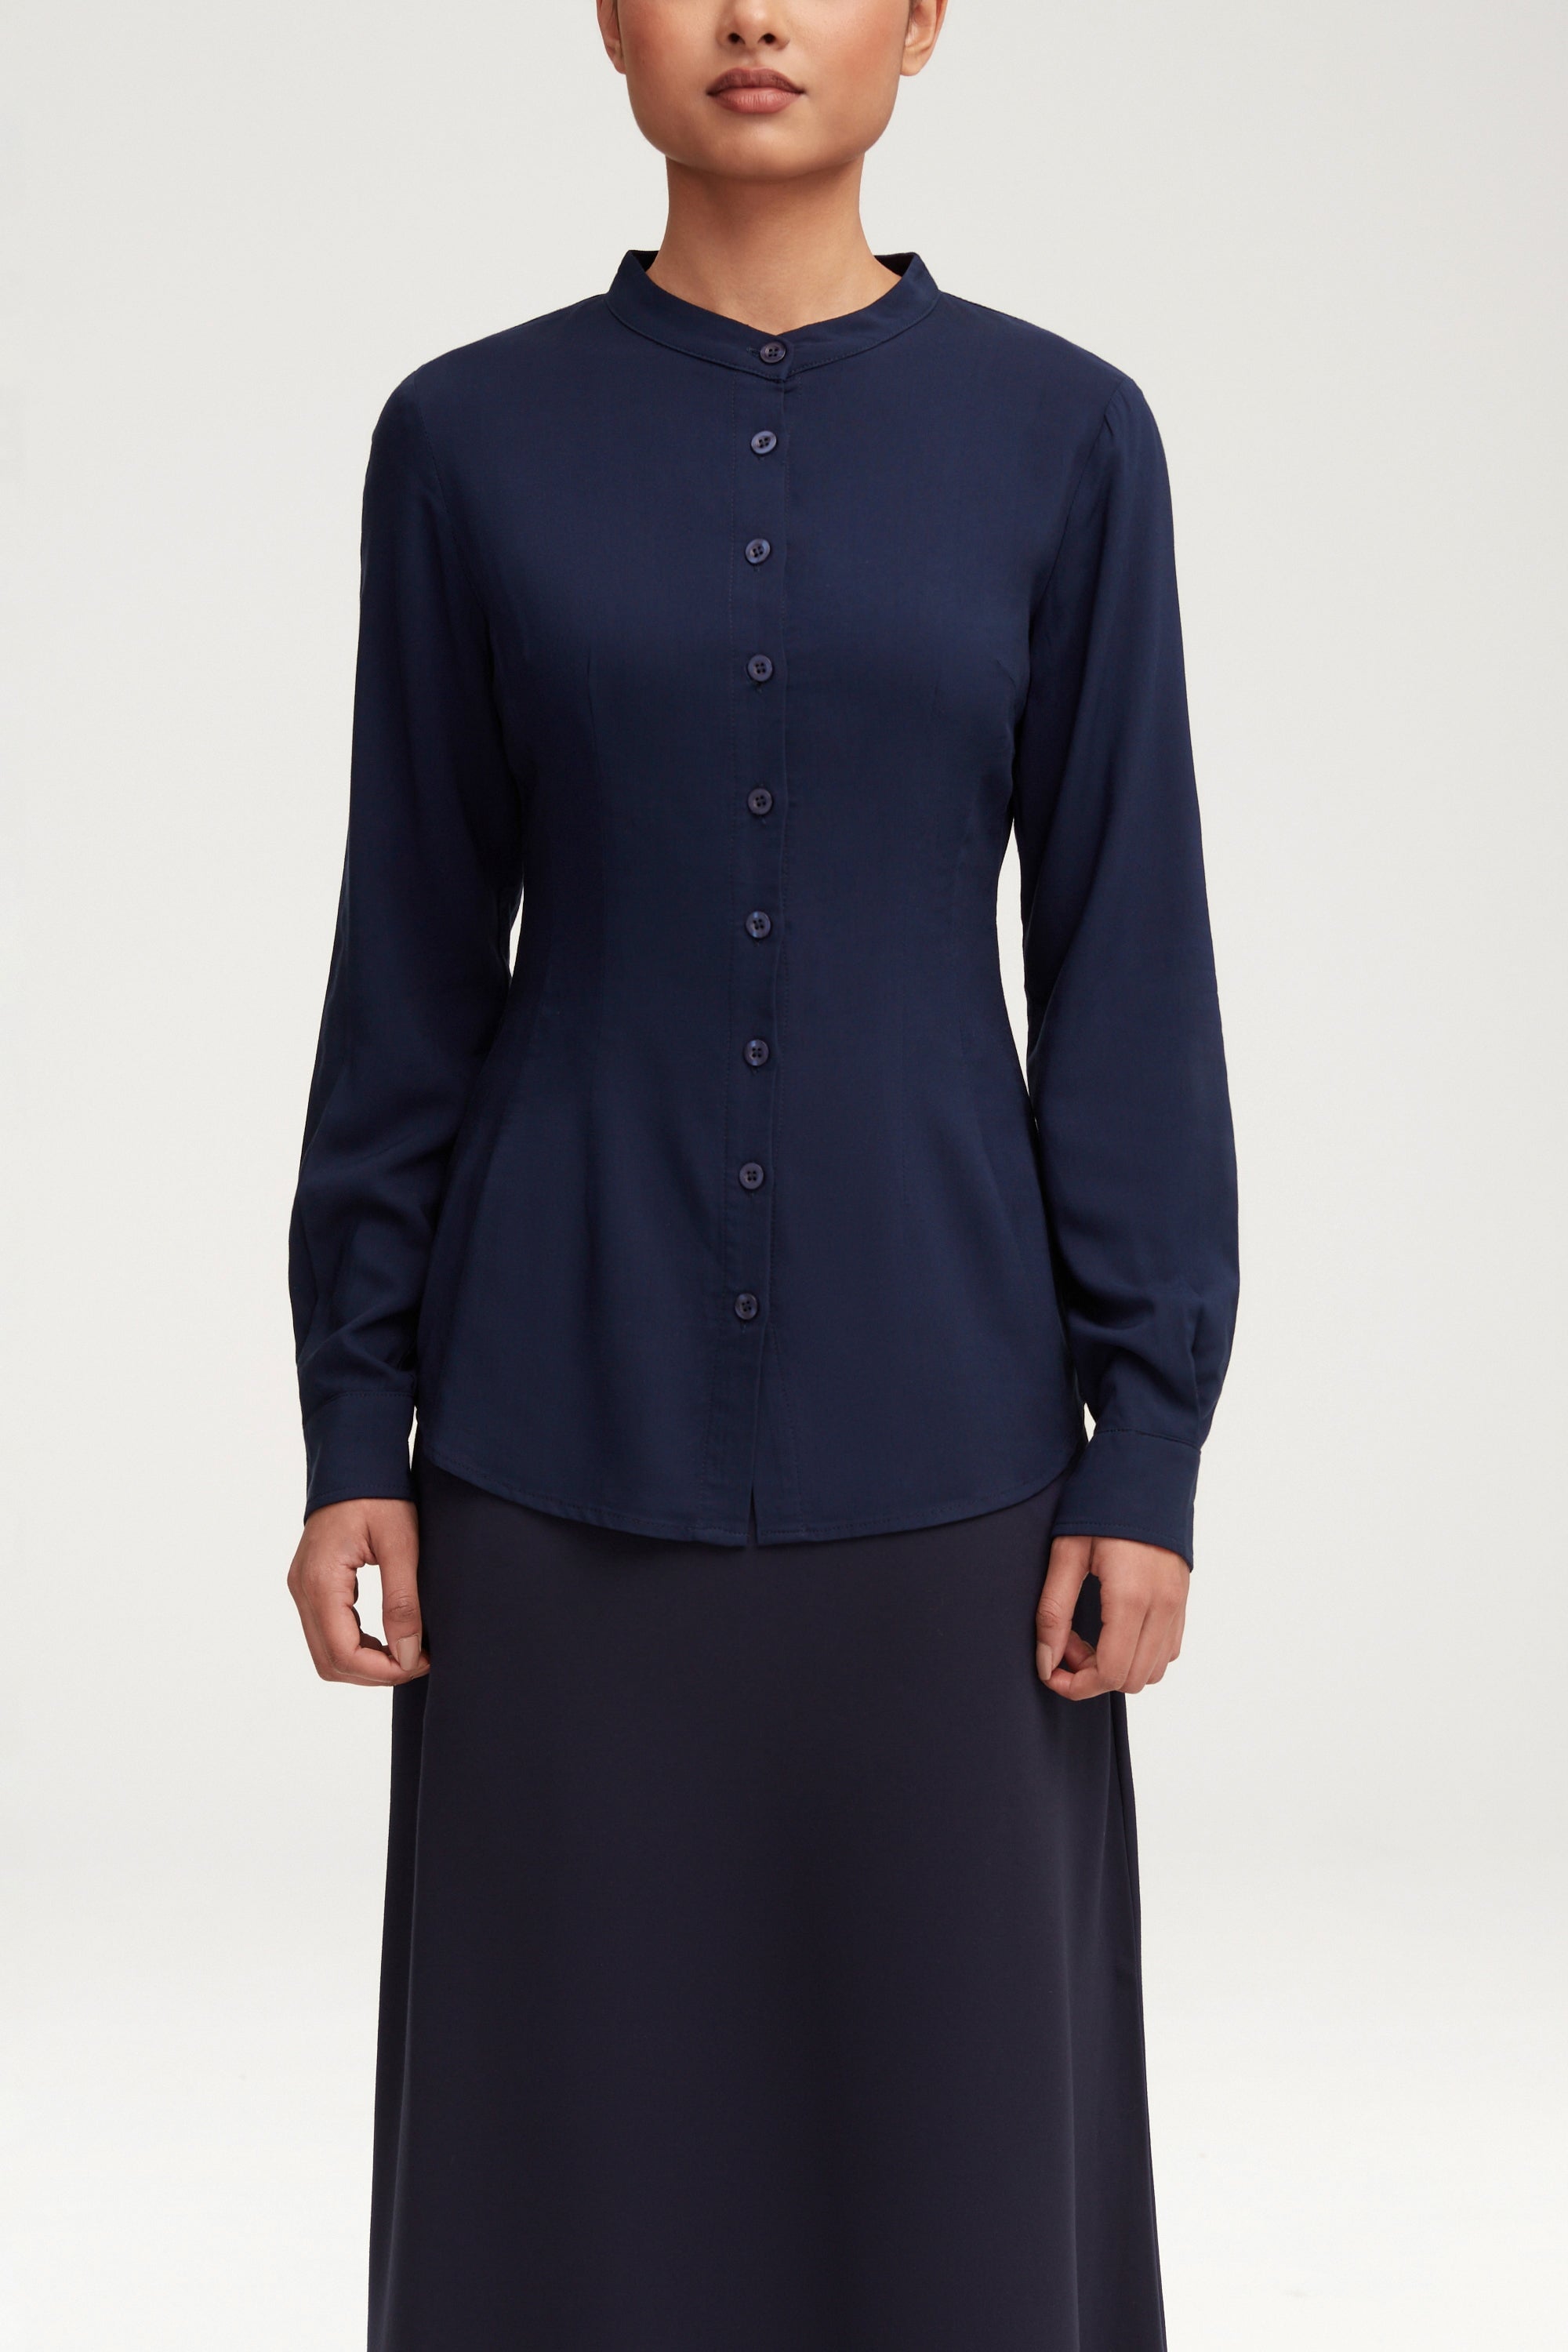 Adina Fitted Button Down Top - Navy Blue Clothing epschoolboard 